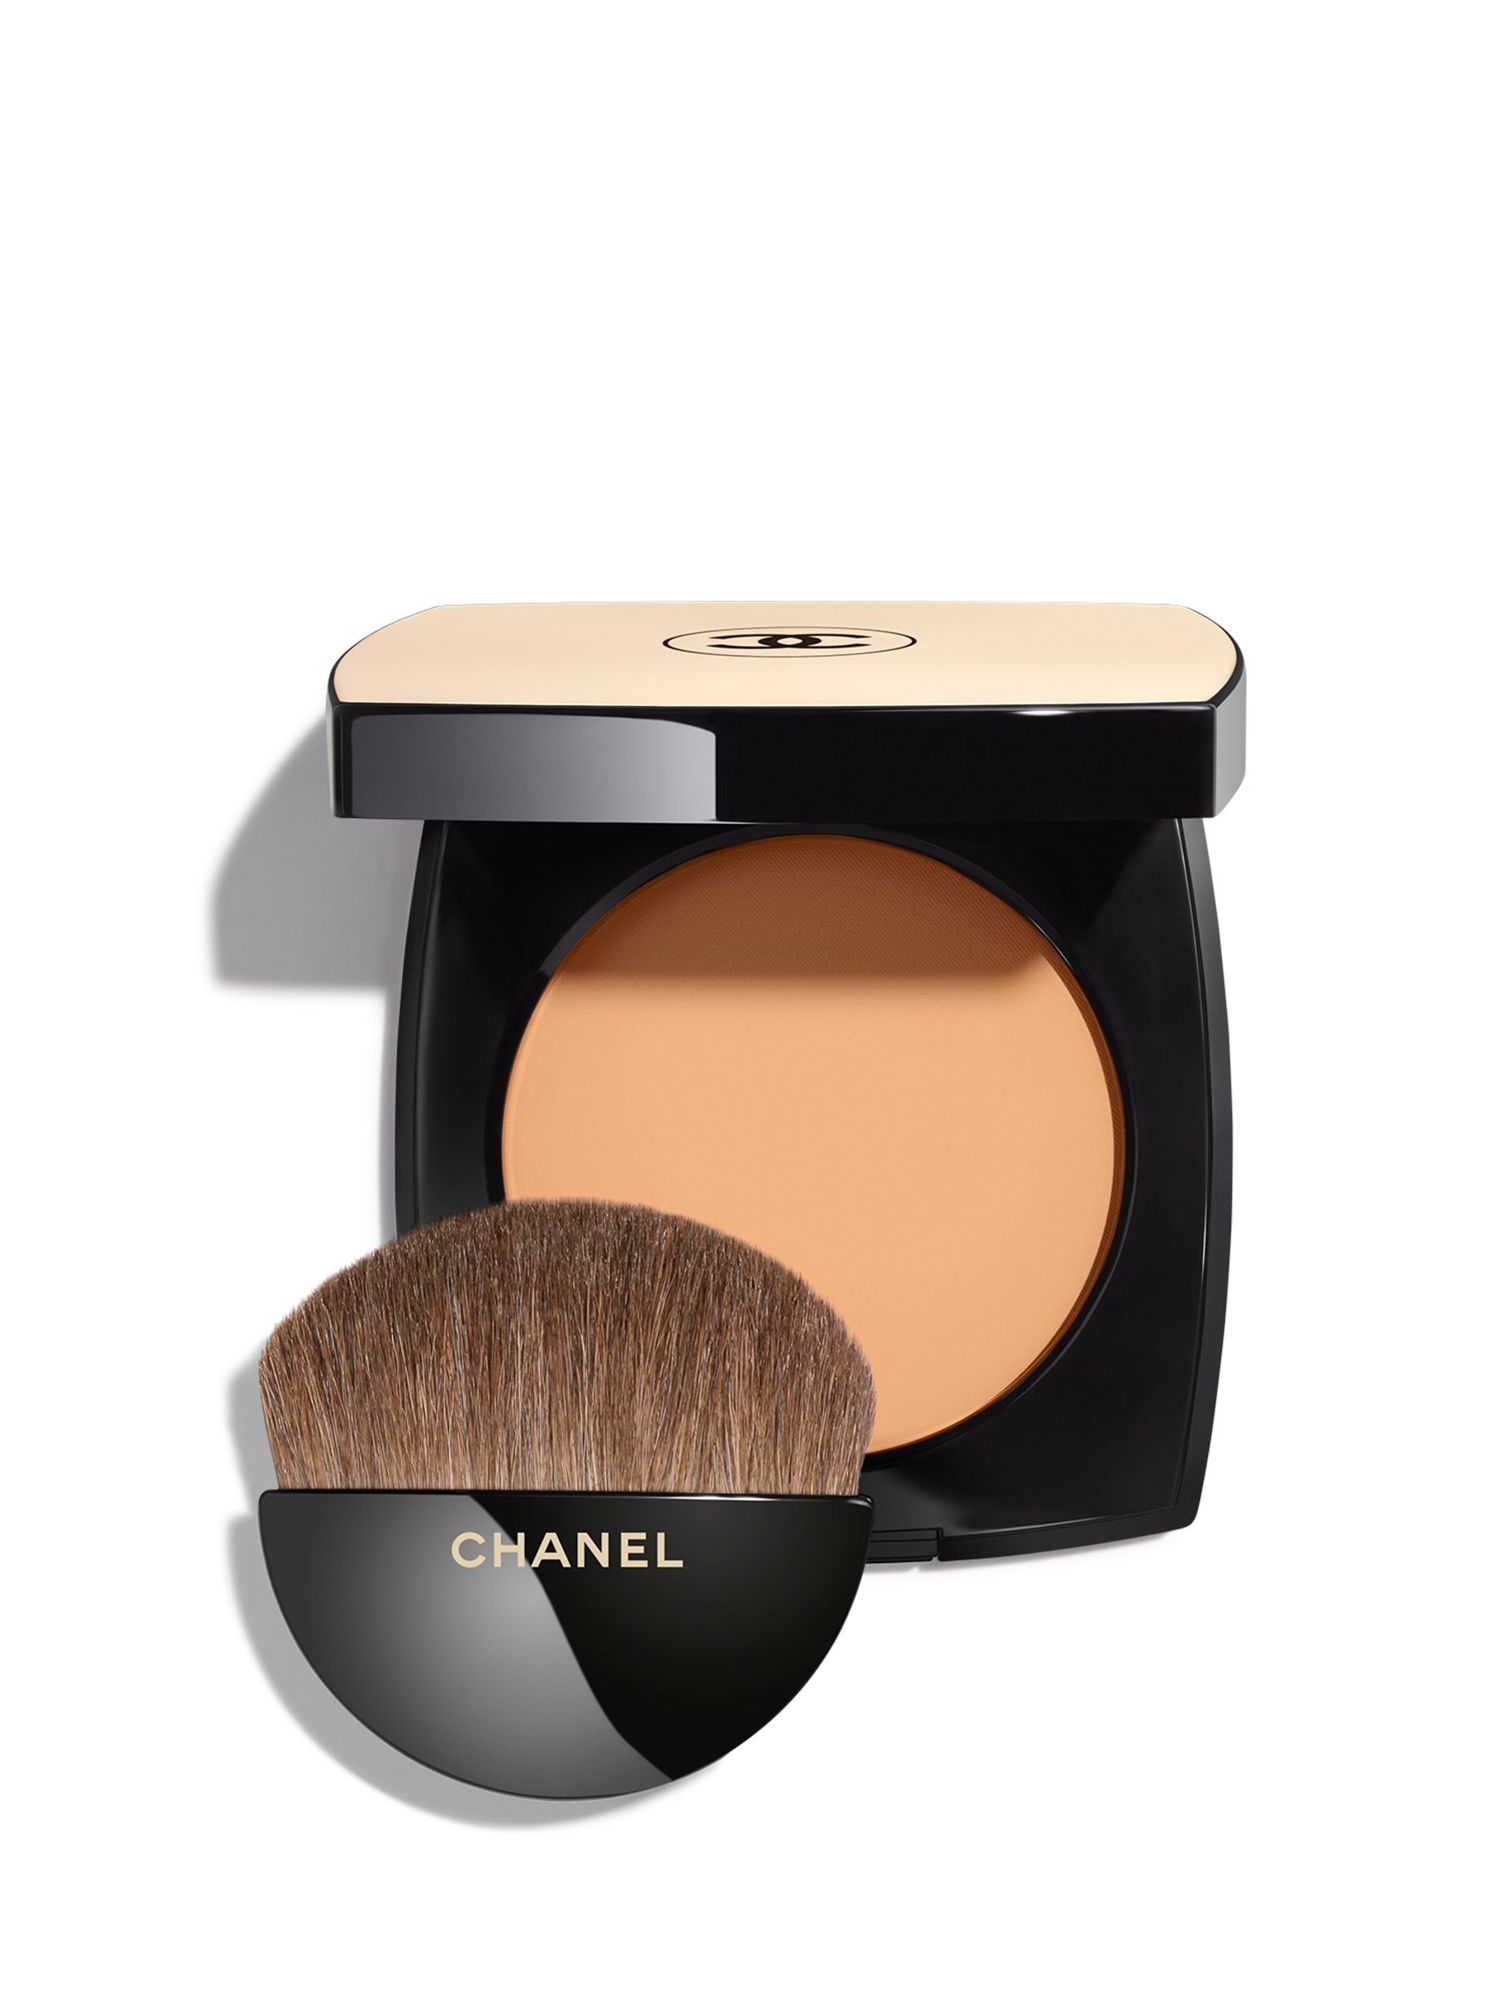 CHANEL Les Beiges Oversize Healthy Glow Sun-Kissed Powder in